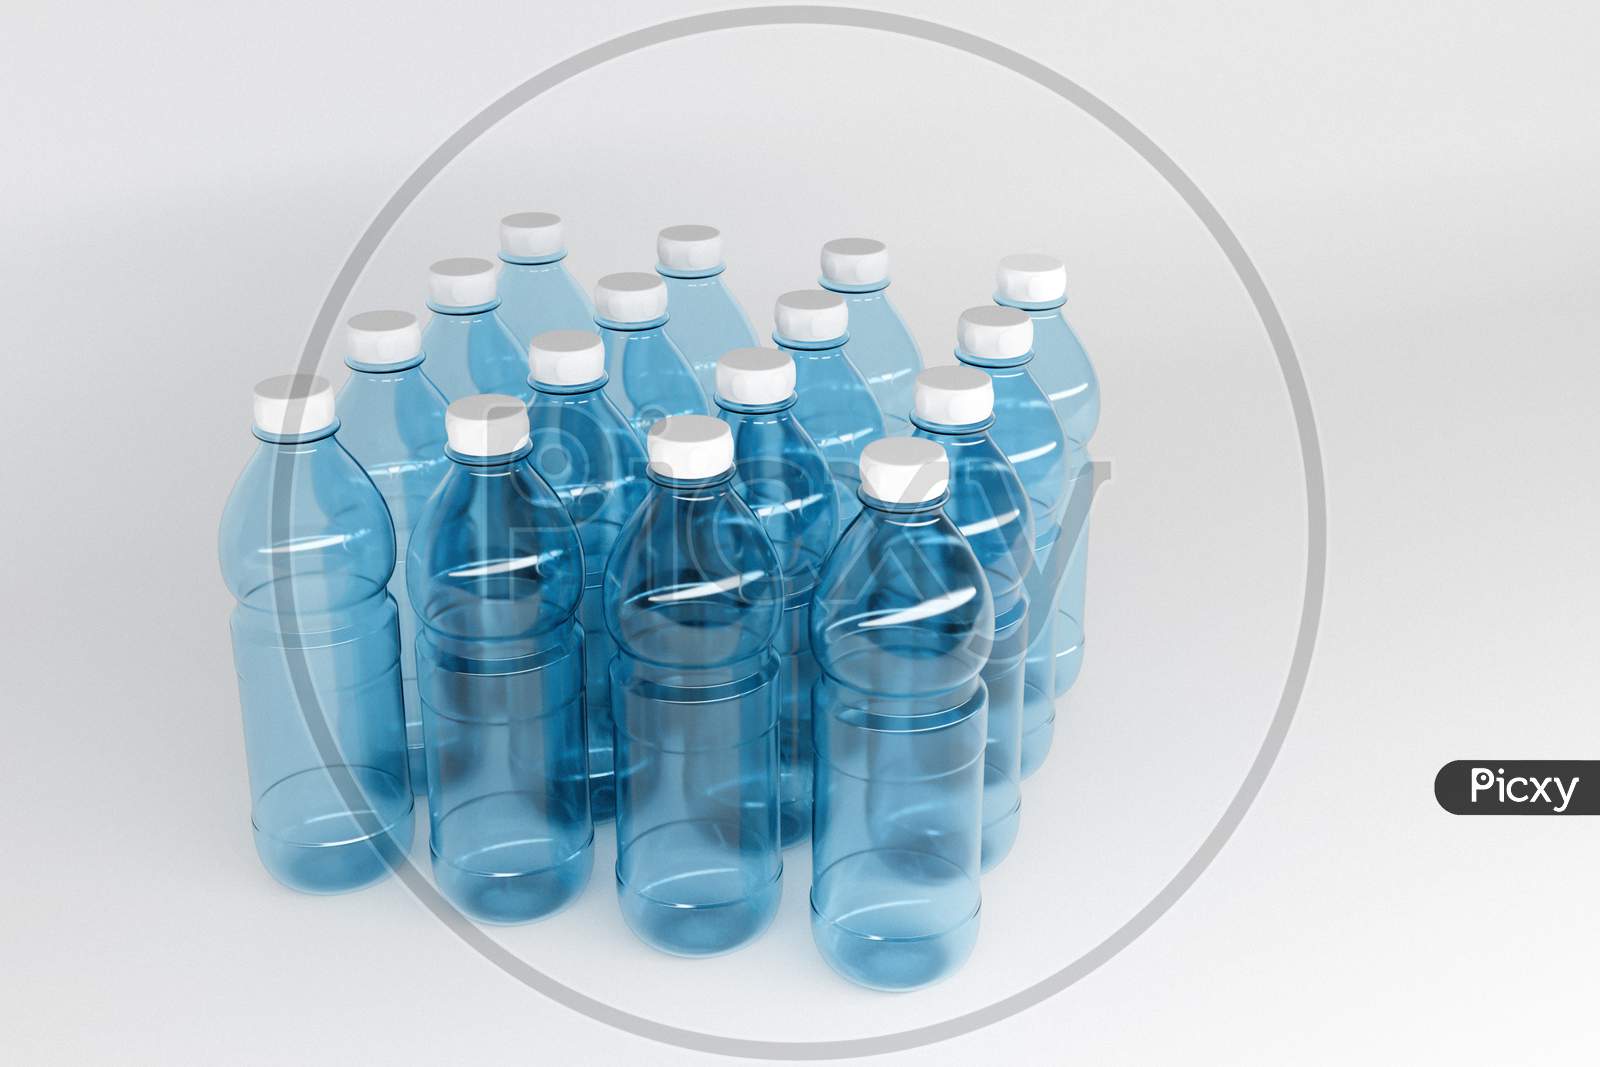 3D Model Plastic Transparent And Gray Opaque Bottles With A Size Of 1.5 Liters. Bottles Stand In Even Rows Symmetrically On A White Isolated Background